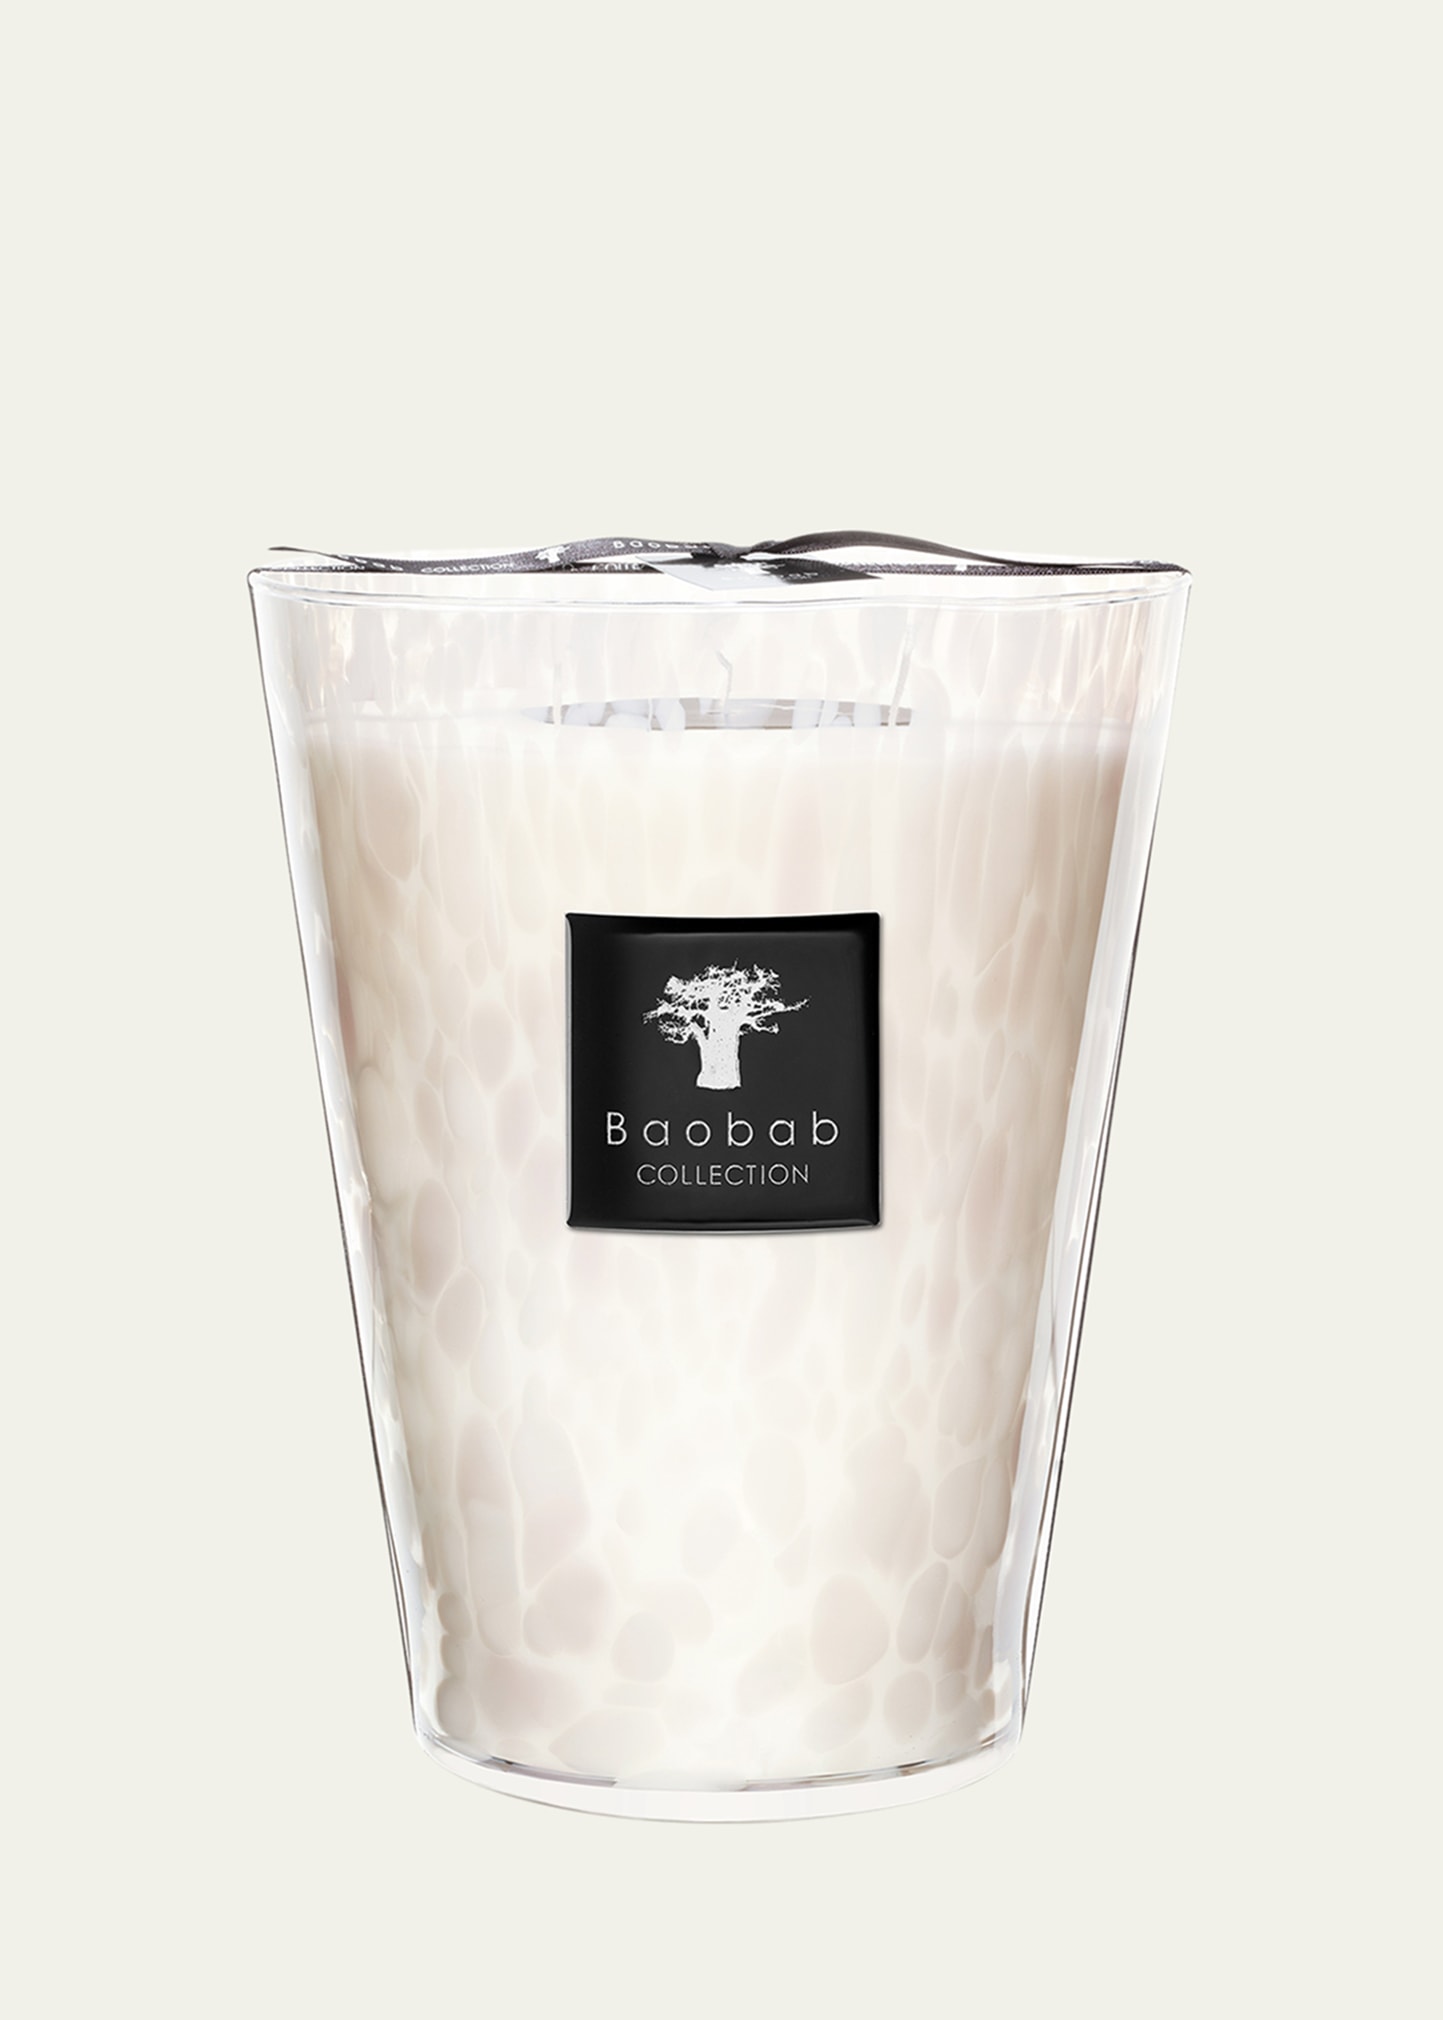 Baobab Collection White Pearls Candle, 9.4"